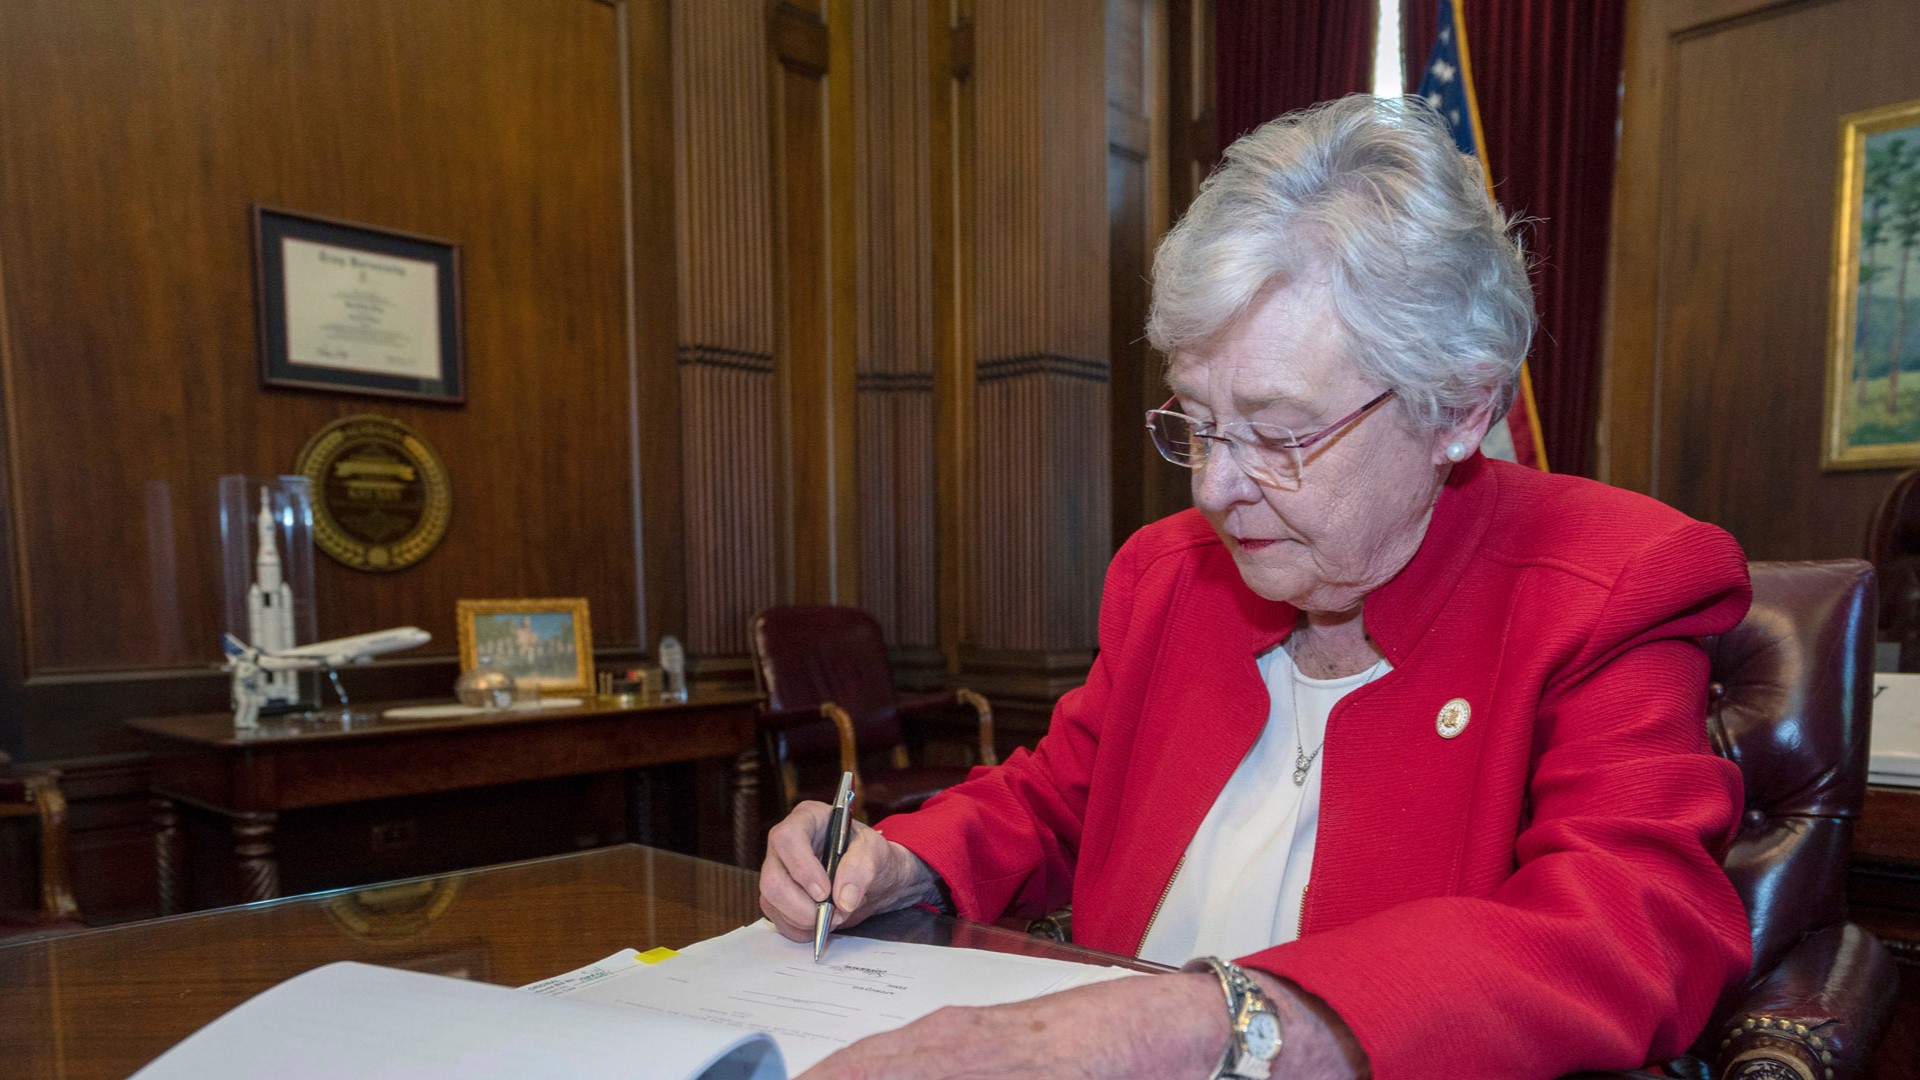 Alabama Governor Kay Ivey has signed a new bill that would outlaw virtually all abortions in the State. But this is bigger than Alabama.  It's part of an effort to get the Supreme Court to reverse the Roe vs. Wade decision and protections for abortion rights nationwide.